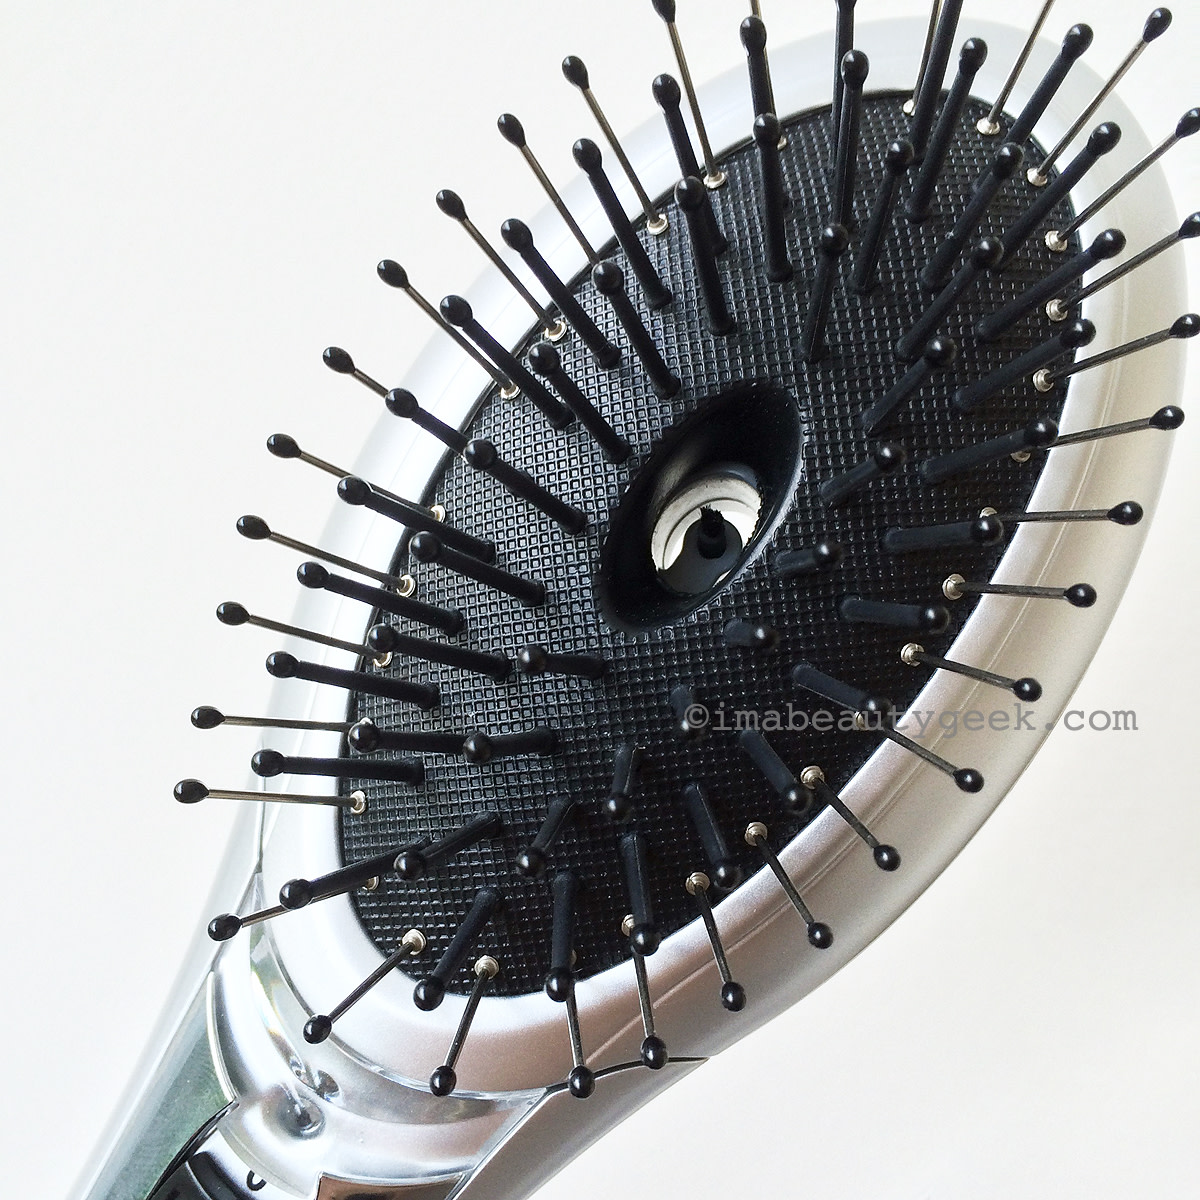 Conair: The Ultimate Brush can help save you a little f****-management time each morning